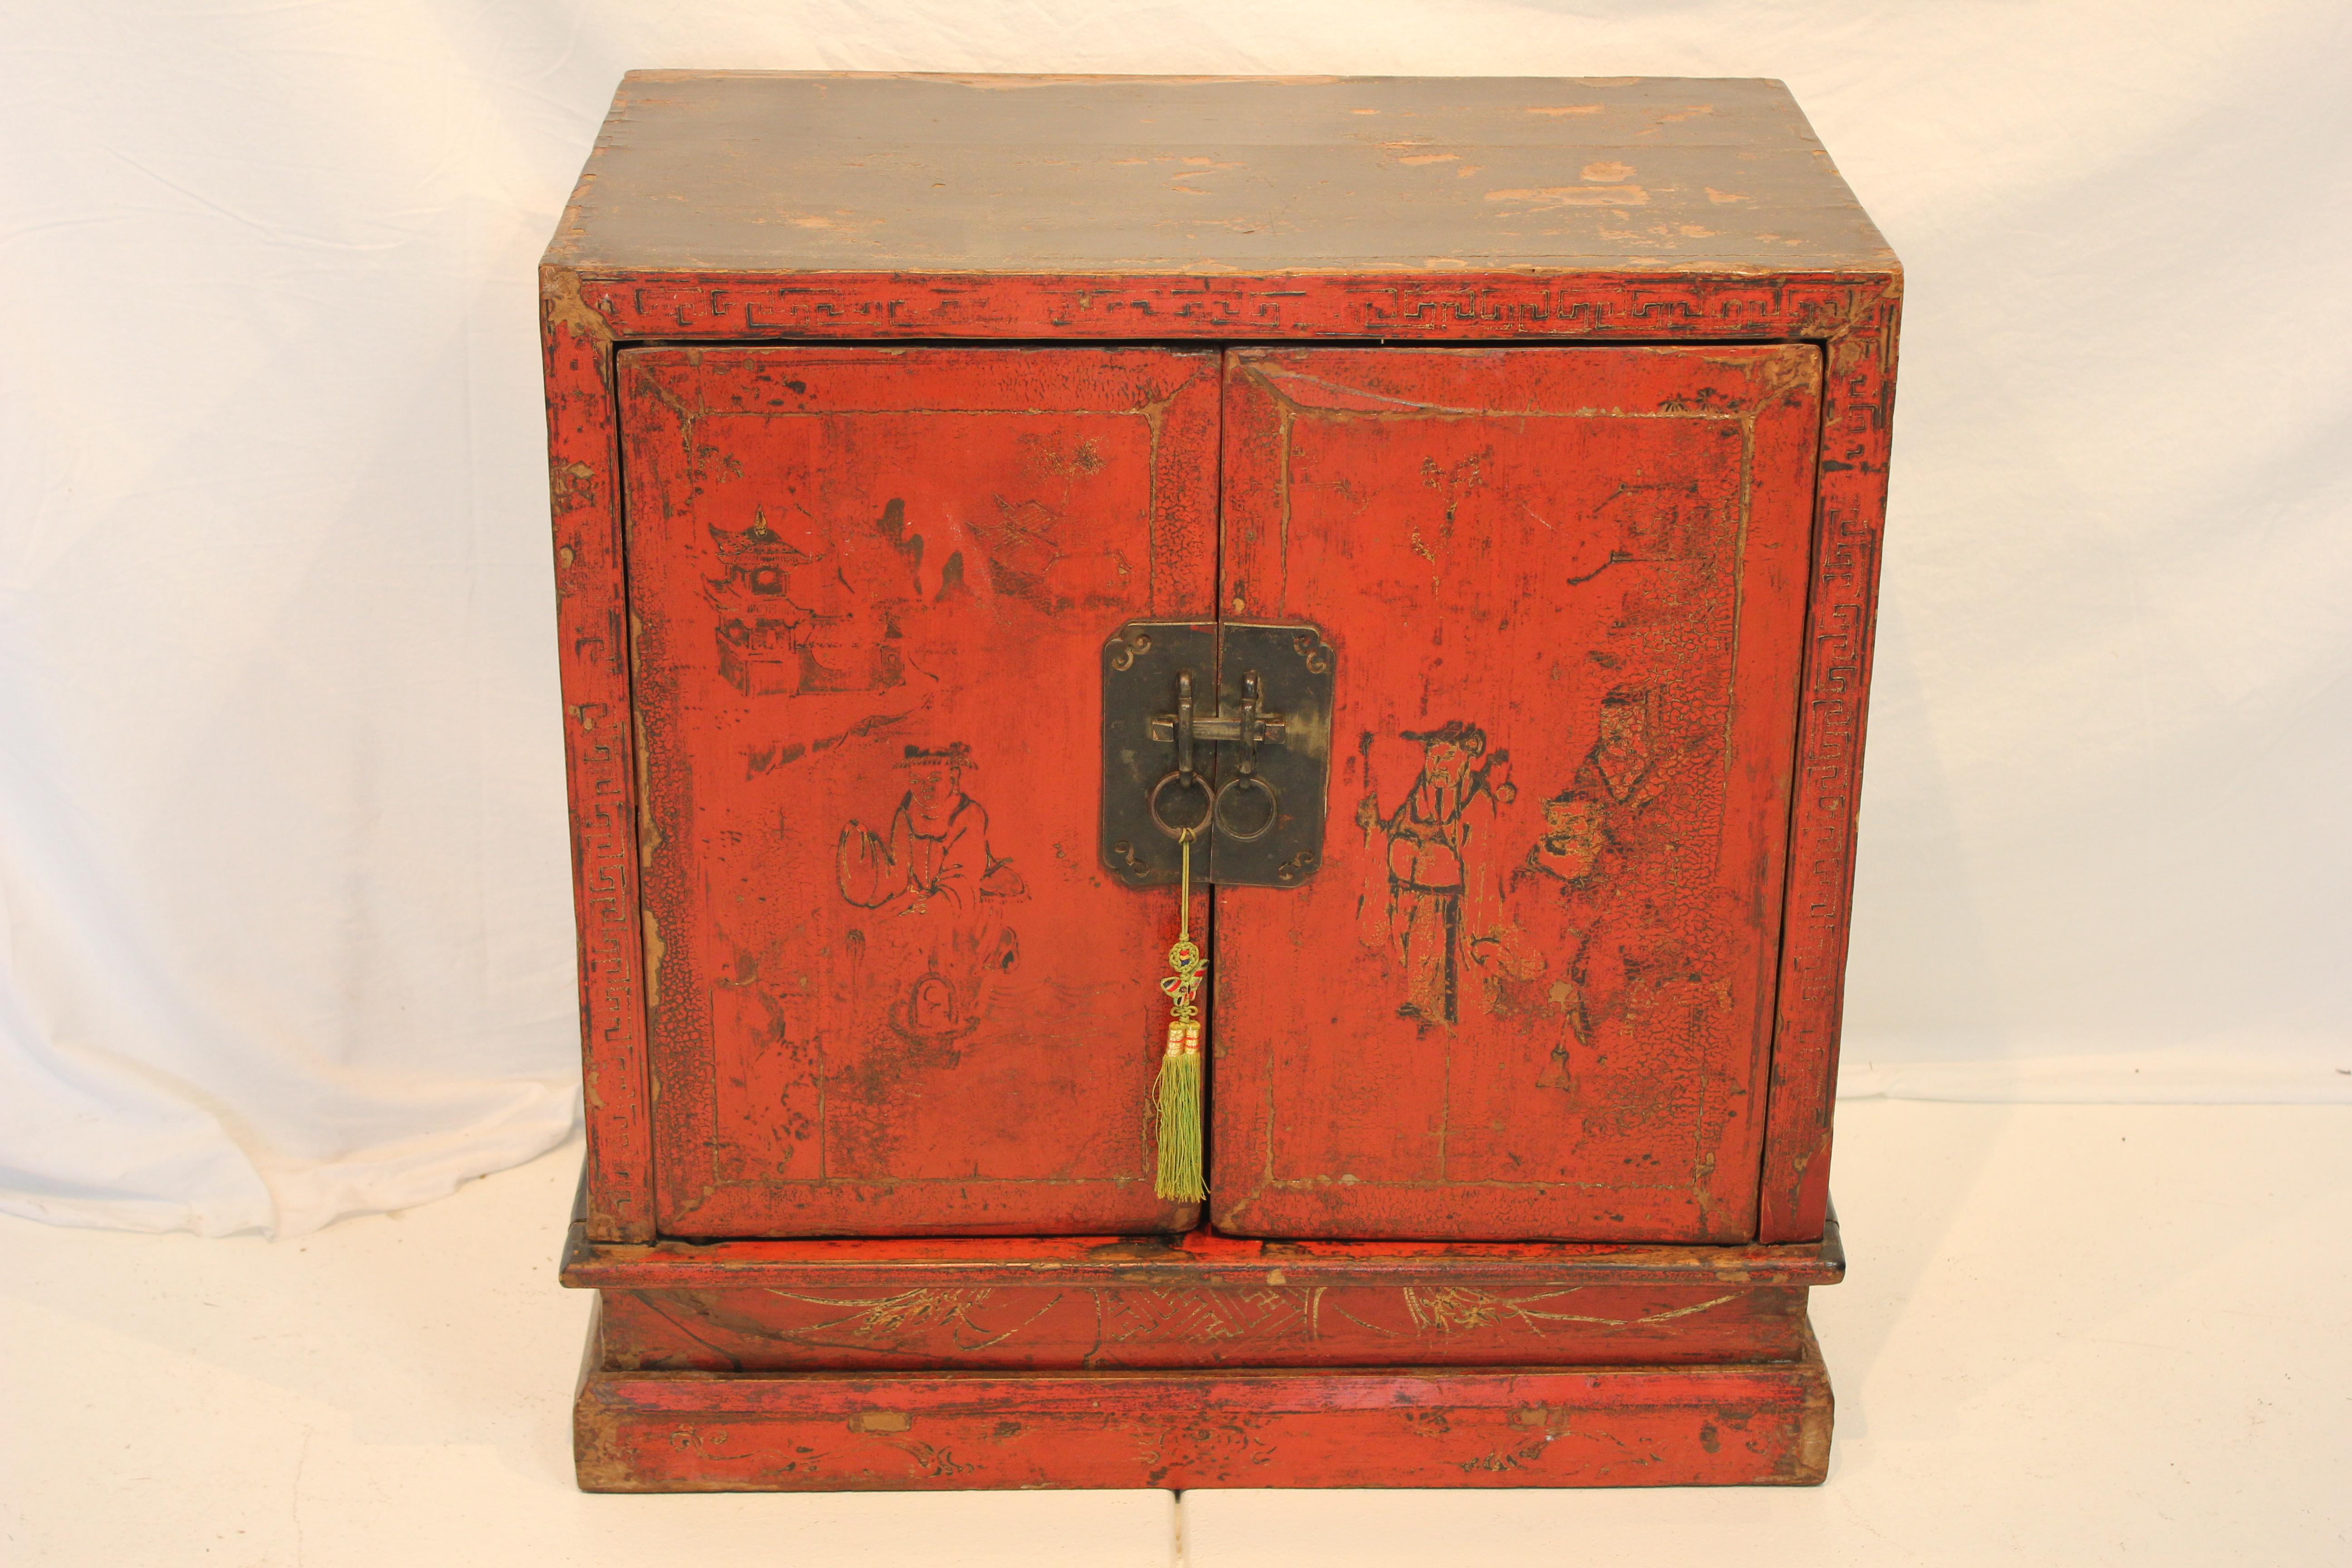 Mid 19th Century Chinese Hand Painted Red Lacquer Chinoiserie Two Door Cabinet, having a Chinoiserie gilt painted scene on the rectangular top and two hinged door panels. Pair of brass lifting handles on side panels, brass lock plate and pin